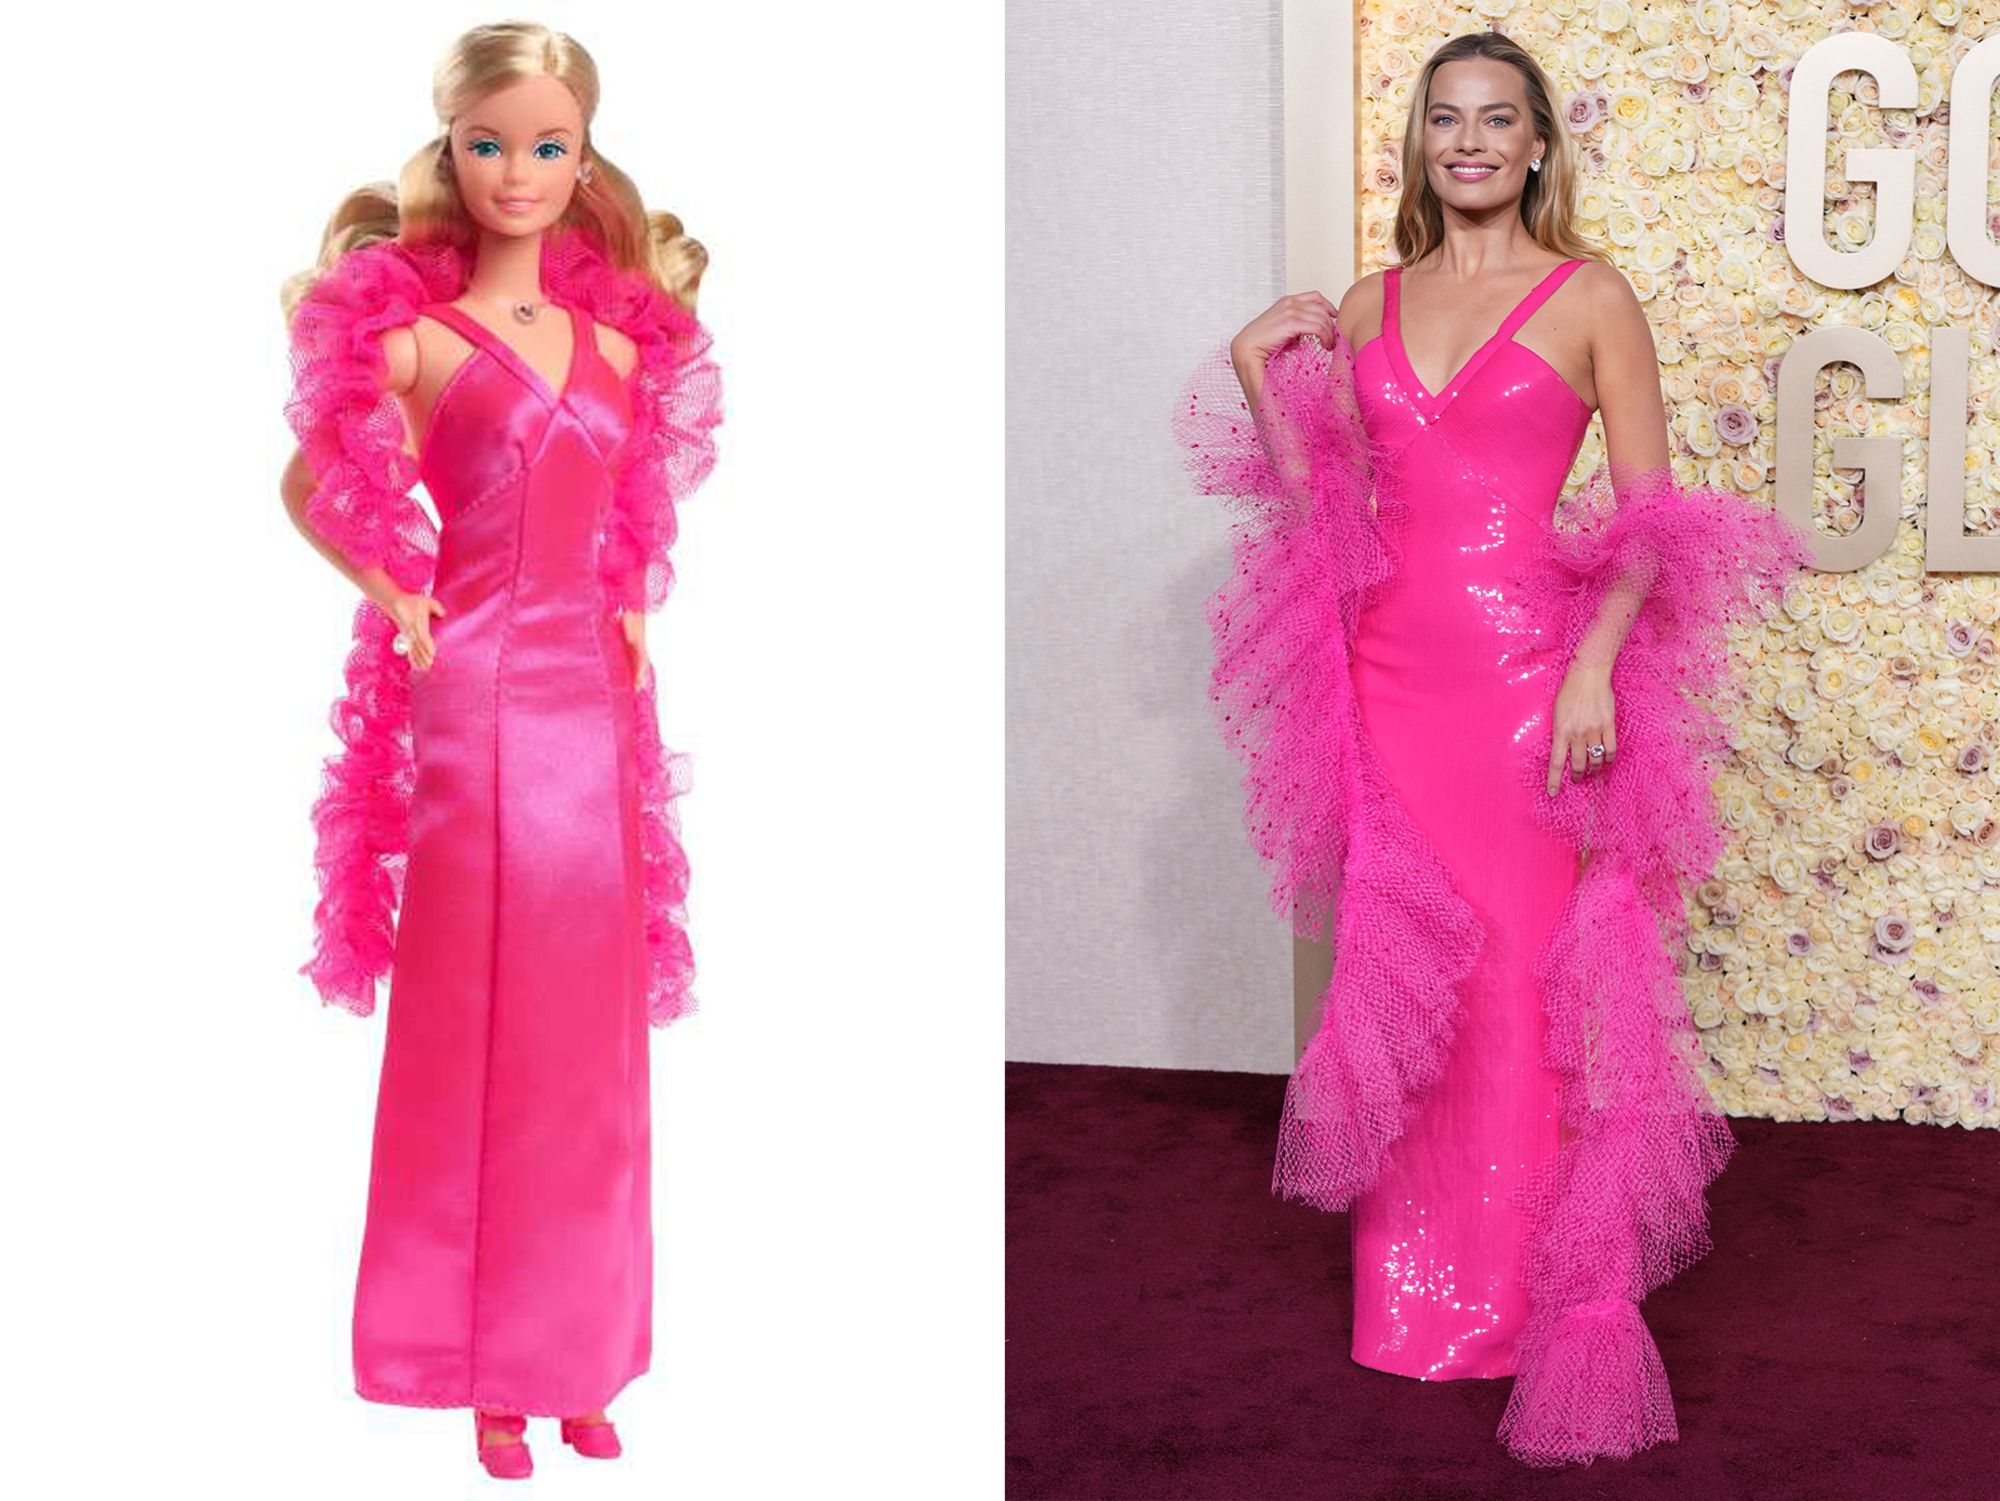 Seeing double: Mattel's "Superstar Barbie" and actress Margot Robbie at the Golden Globes.